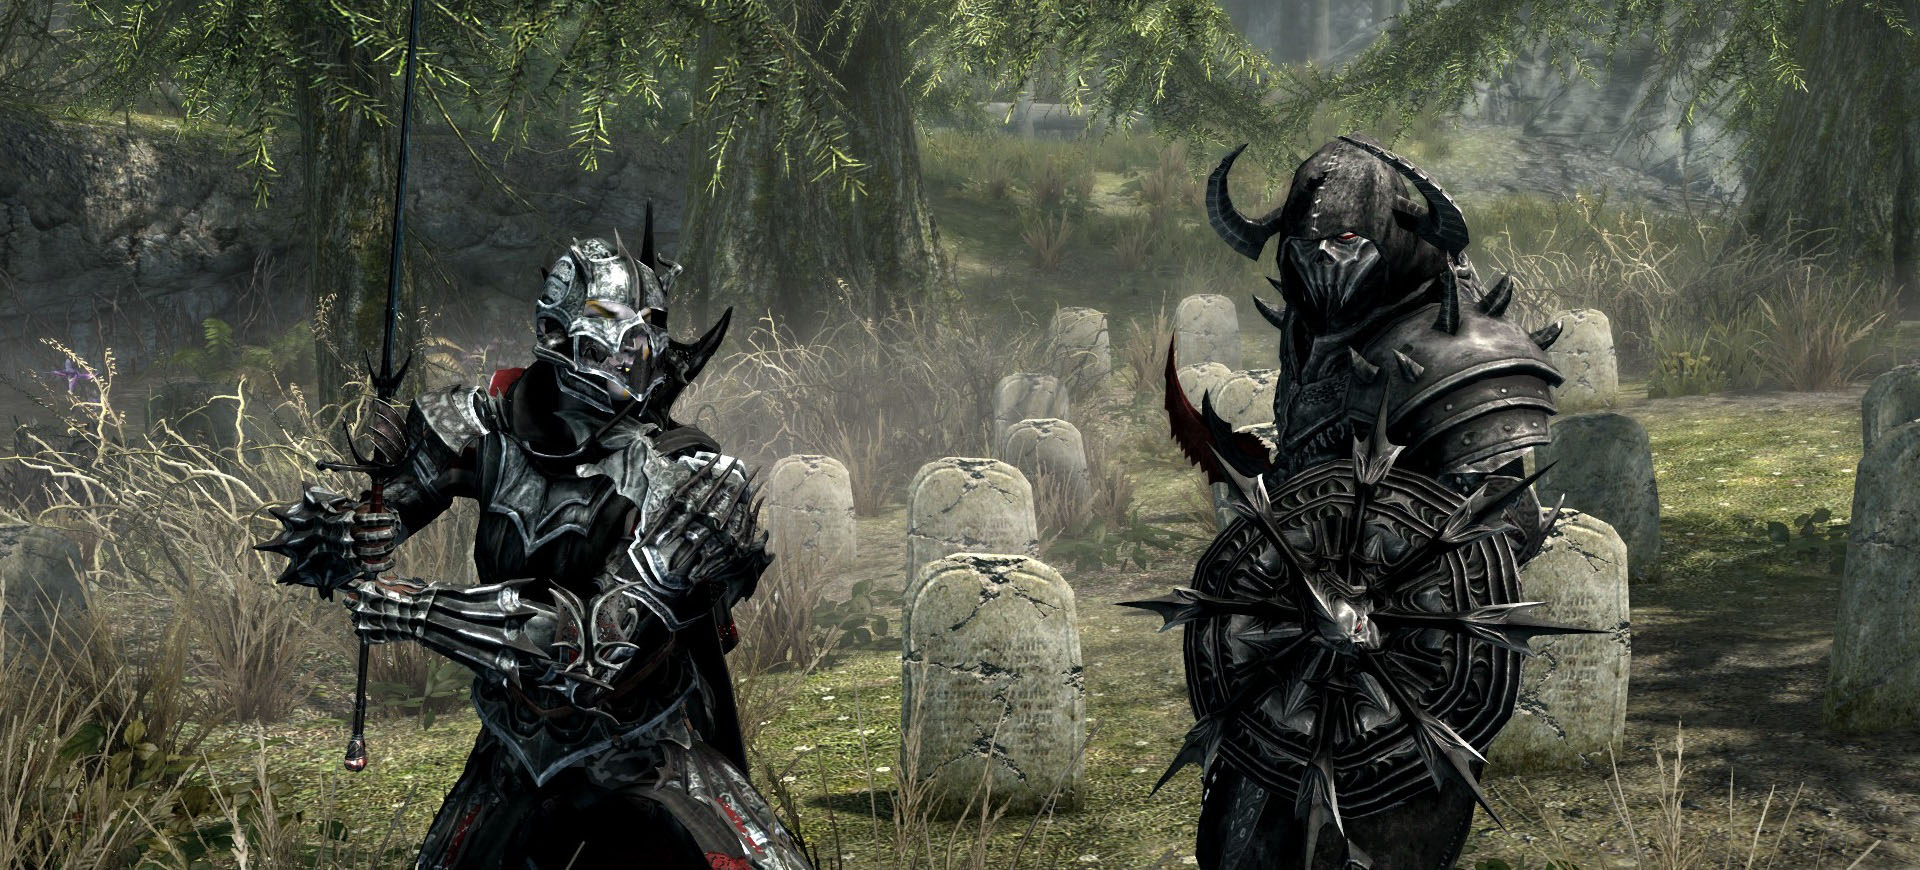 The best Skyrim mods you can use right now to upgrade the